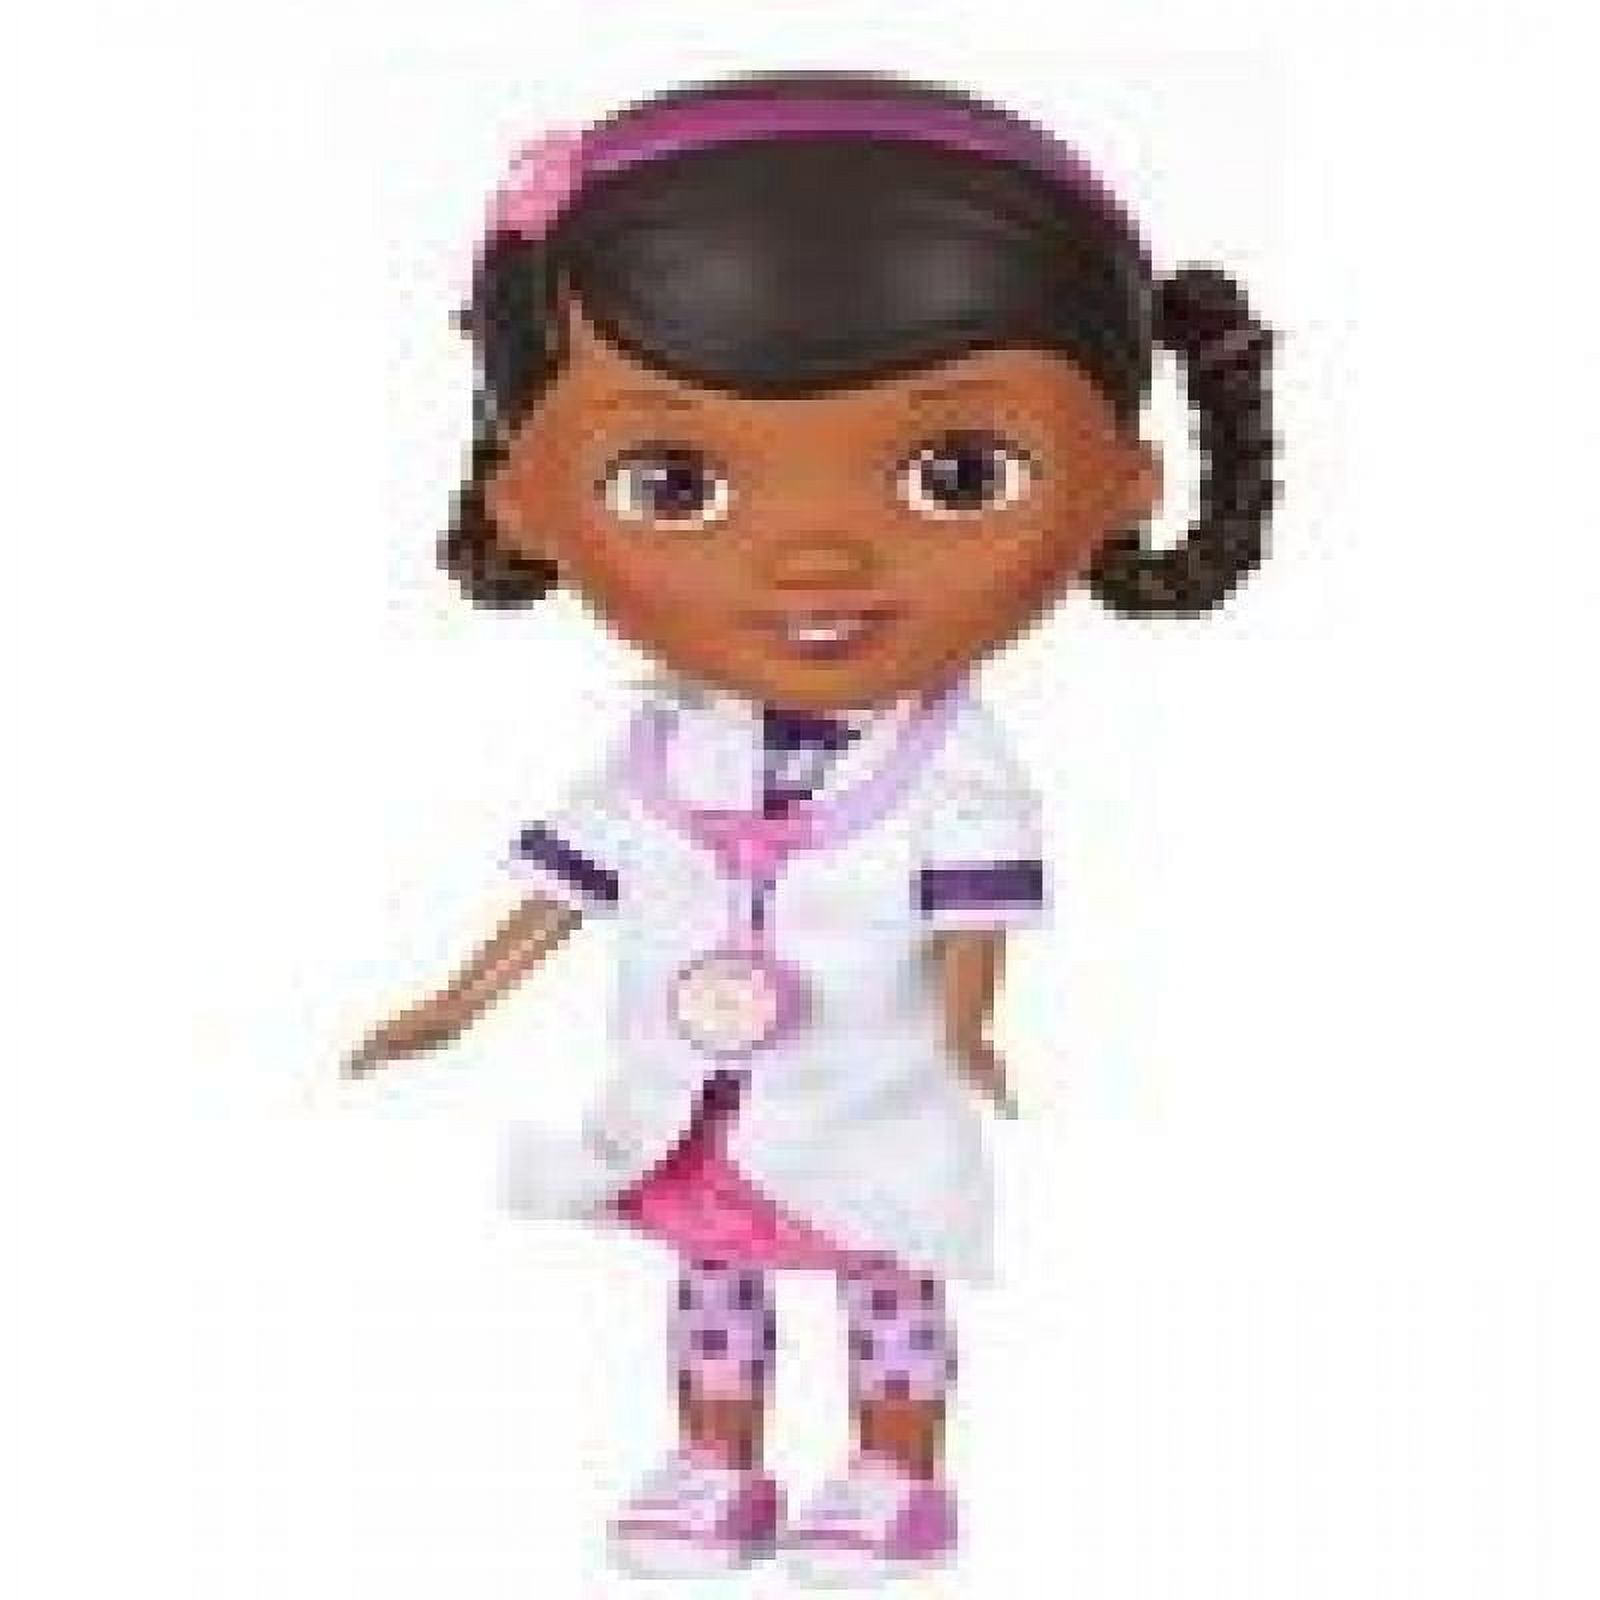 Doc Mcstuffins Doctor Outfit with Stethoscope Exclusive Doll by Disney - image 1 of 3